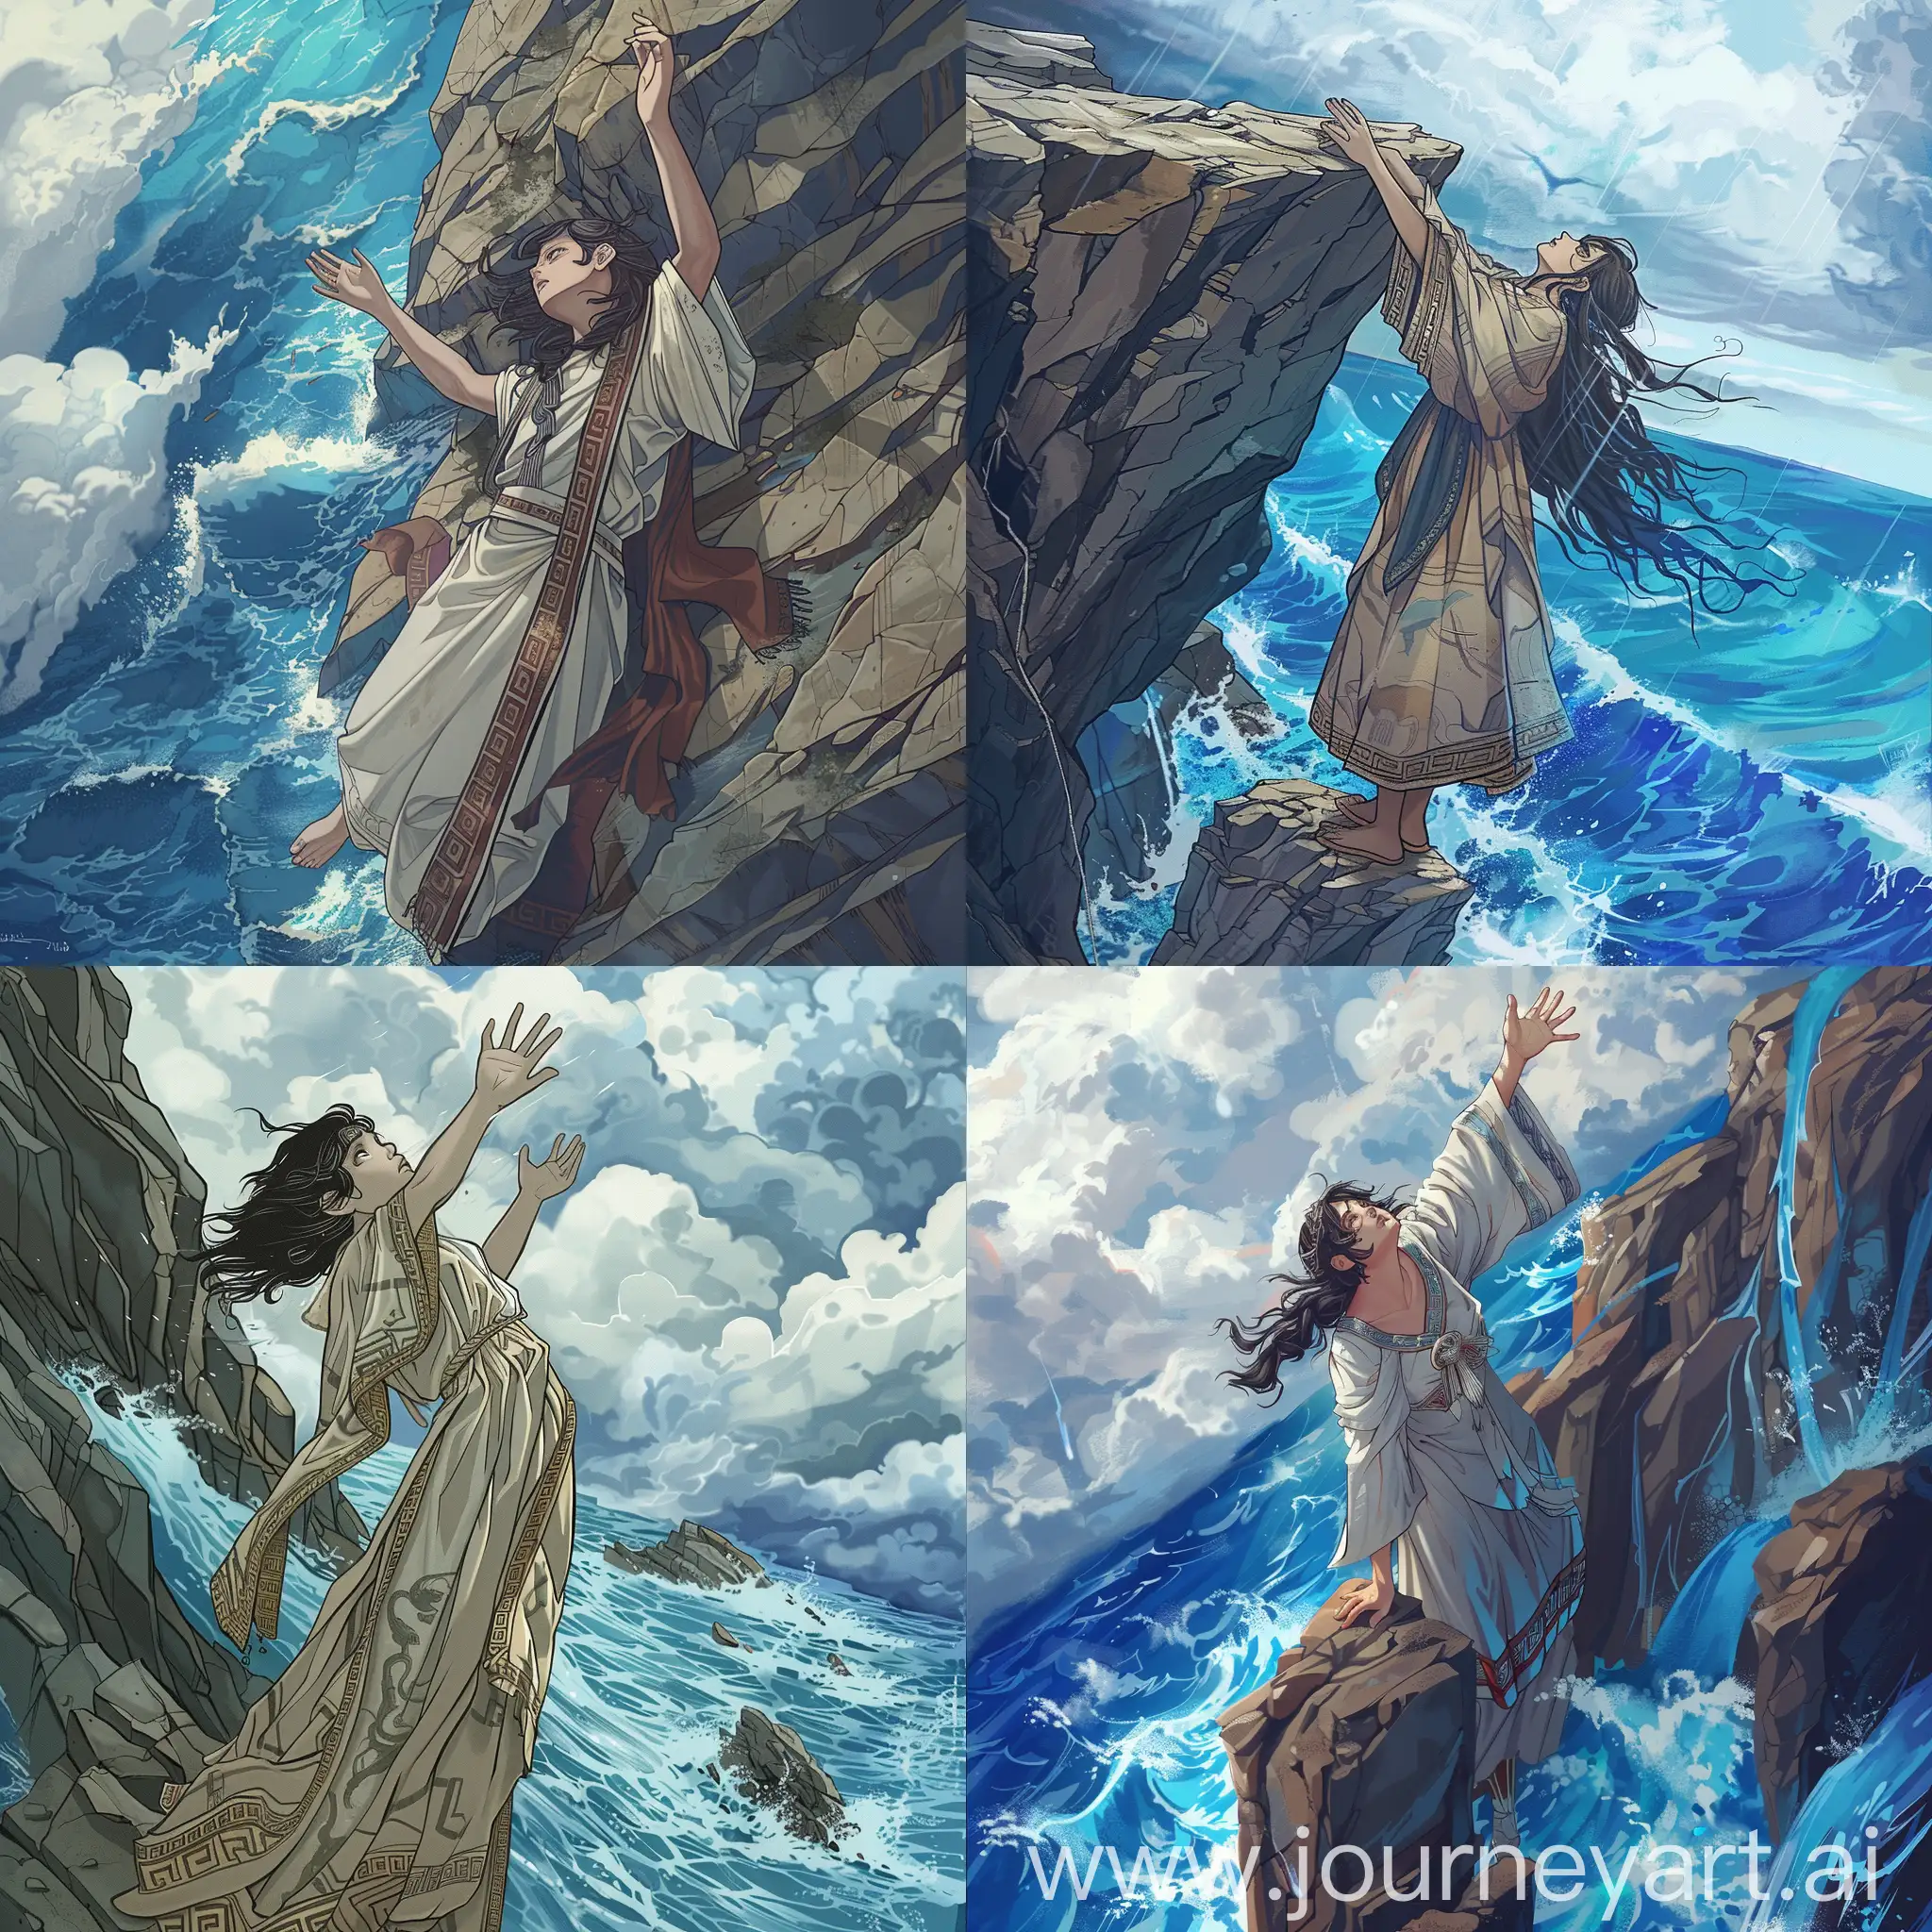 draw a beautiful girl in an ancient Greek robe standing on the edge of a cliff.  there is a sad expression on her face, she reaches up with her hands, as if calling for the help of the gods.  Below, cruel blue waves crash against sharp rocks.  The sky is cloudy, a strong wind is blowing, developing the girl’s black hair.  genre - semi-realism, a mixture of anime and realism.